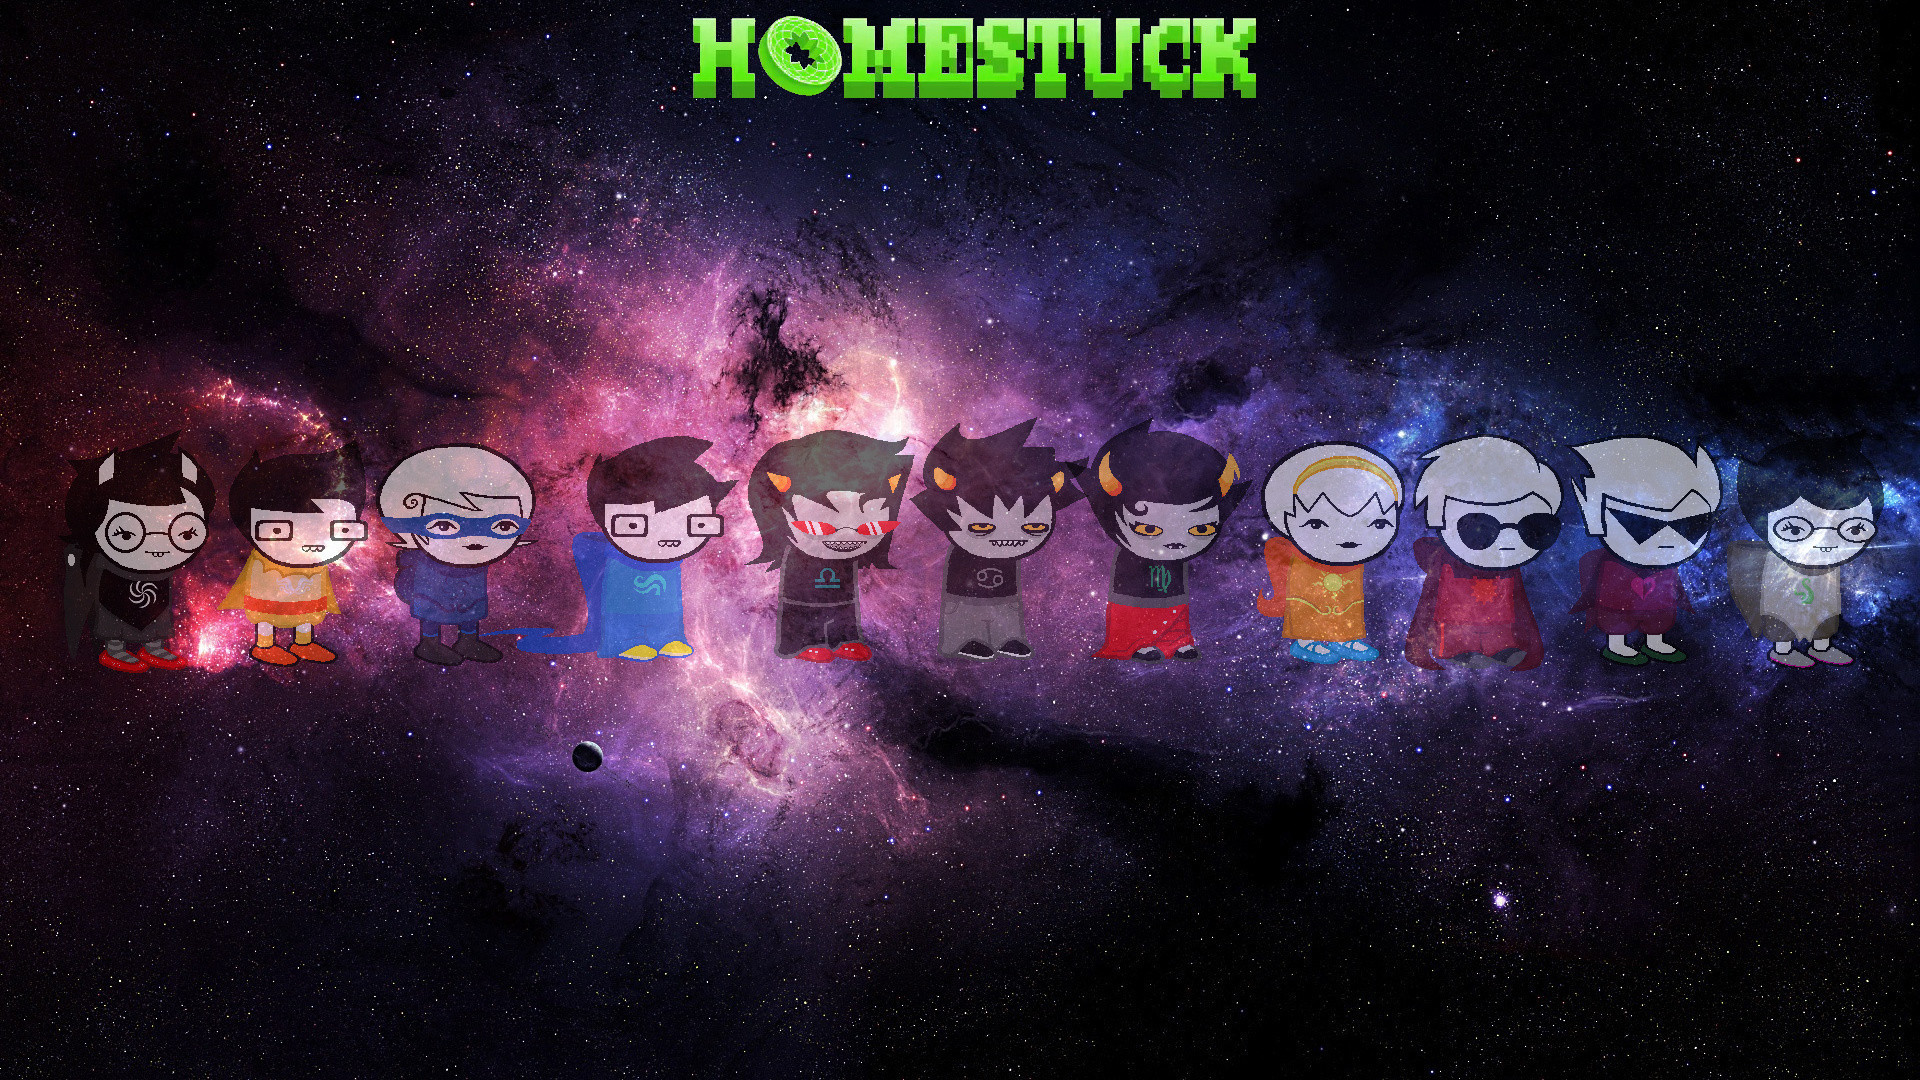 1920x1080 Homestuck Wallpaper that I made for you guys enjoy! [] Need #iPhone